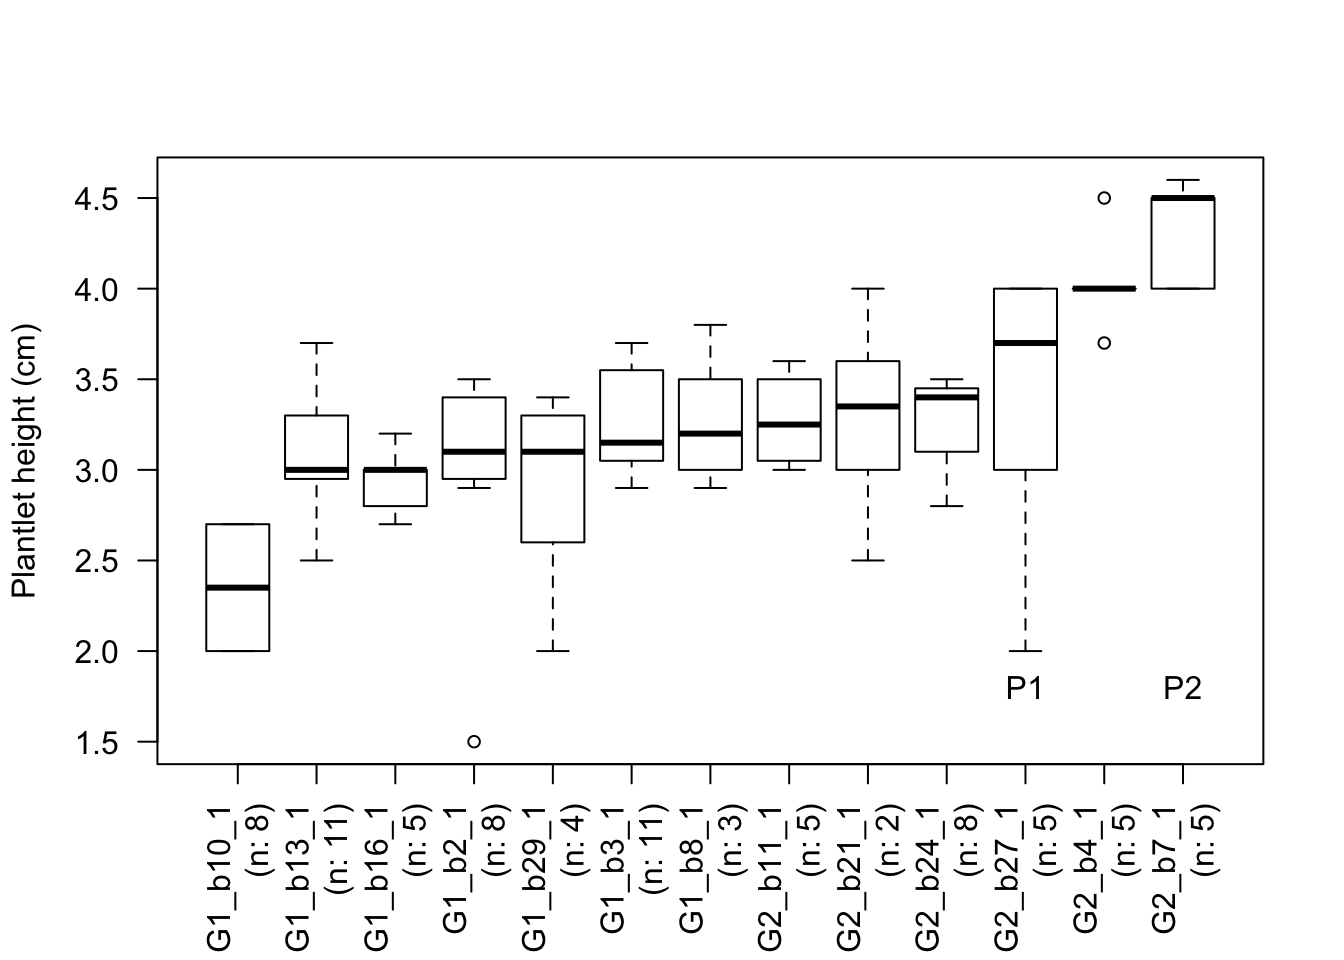 Boxplot showing plantlets heights after five weeks of culture for individuals belonging to the blue rooting cluster of diploid Artemisia tridentata subsp. tridentata. The n indicates the number of plantlets cultured for each individual. The top three performers as identified by the rooting experiment are also displayed (P1, P2).